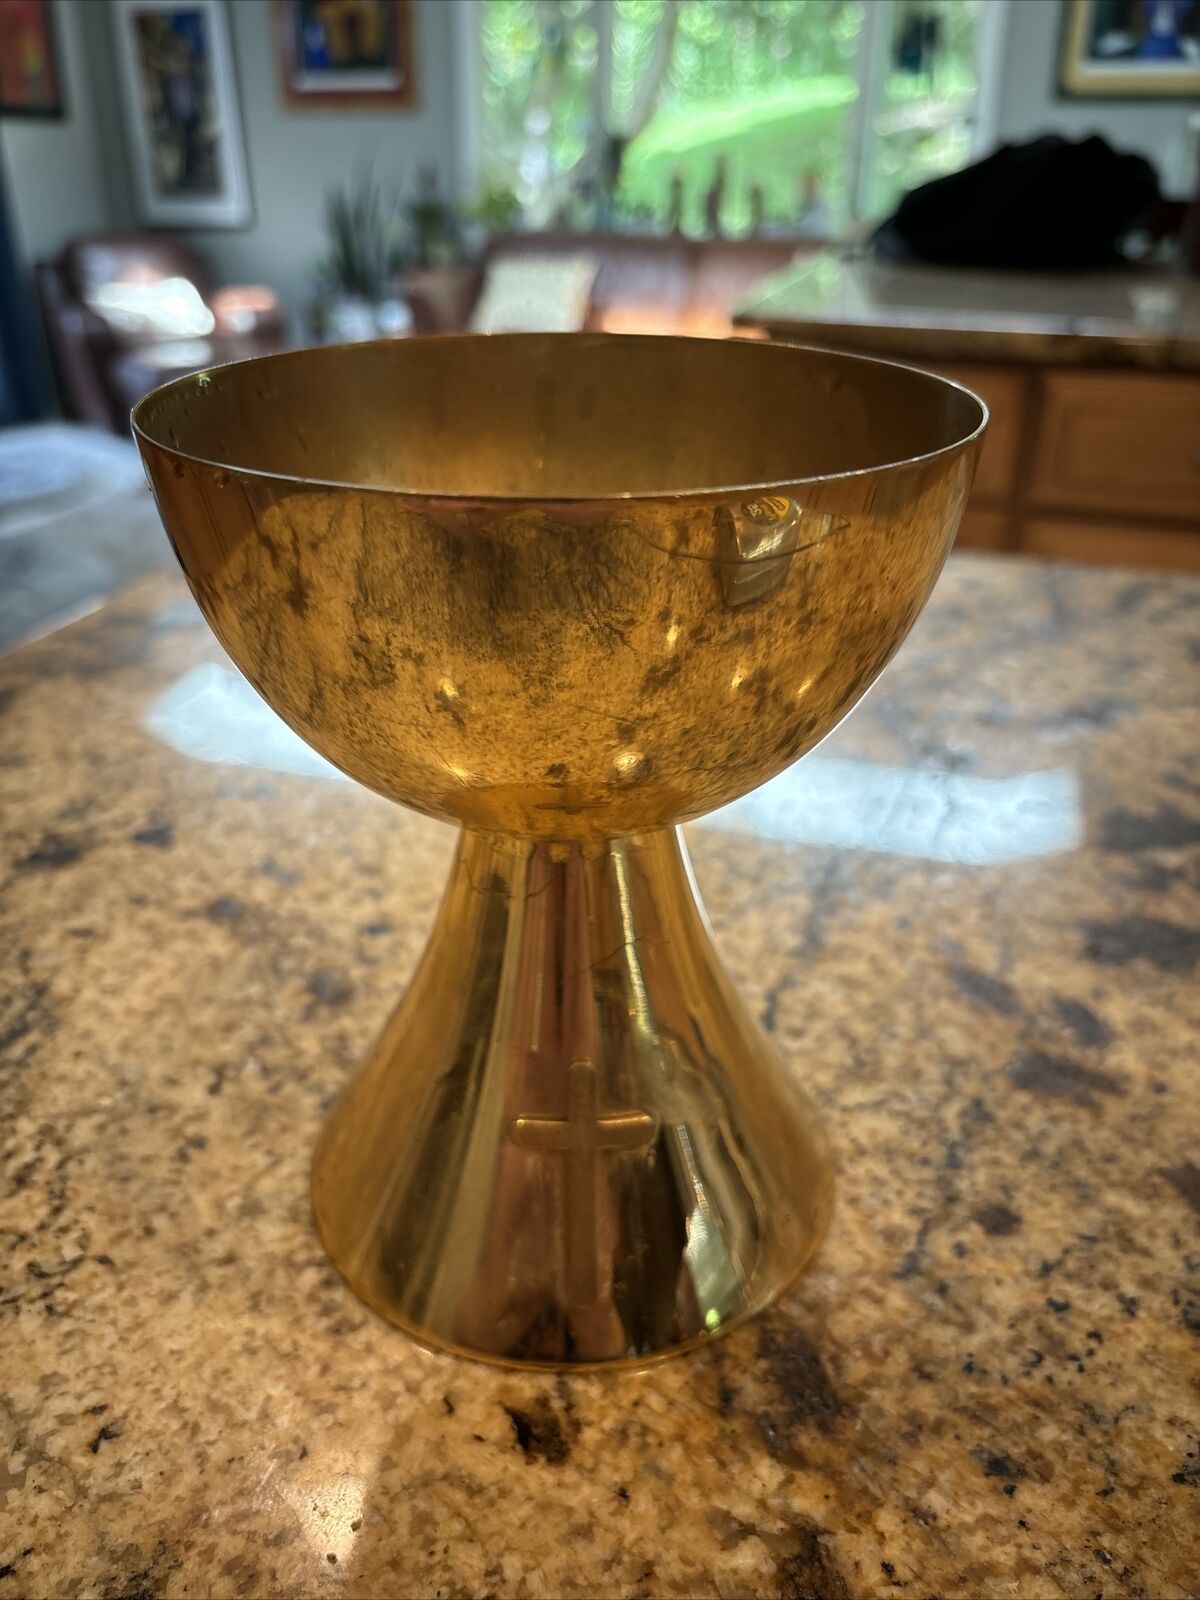 ANTIQUE  GOTHIC STYLE CHURCH CHALICE  - USED